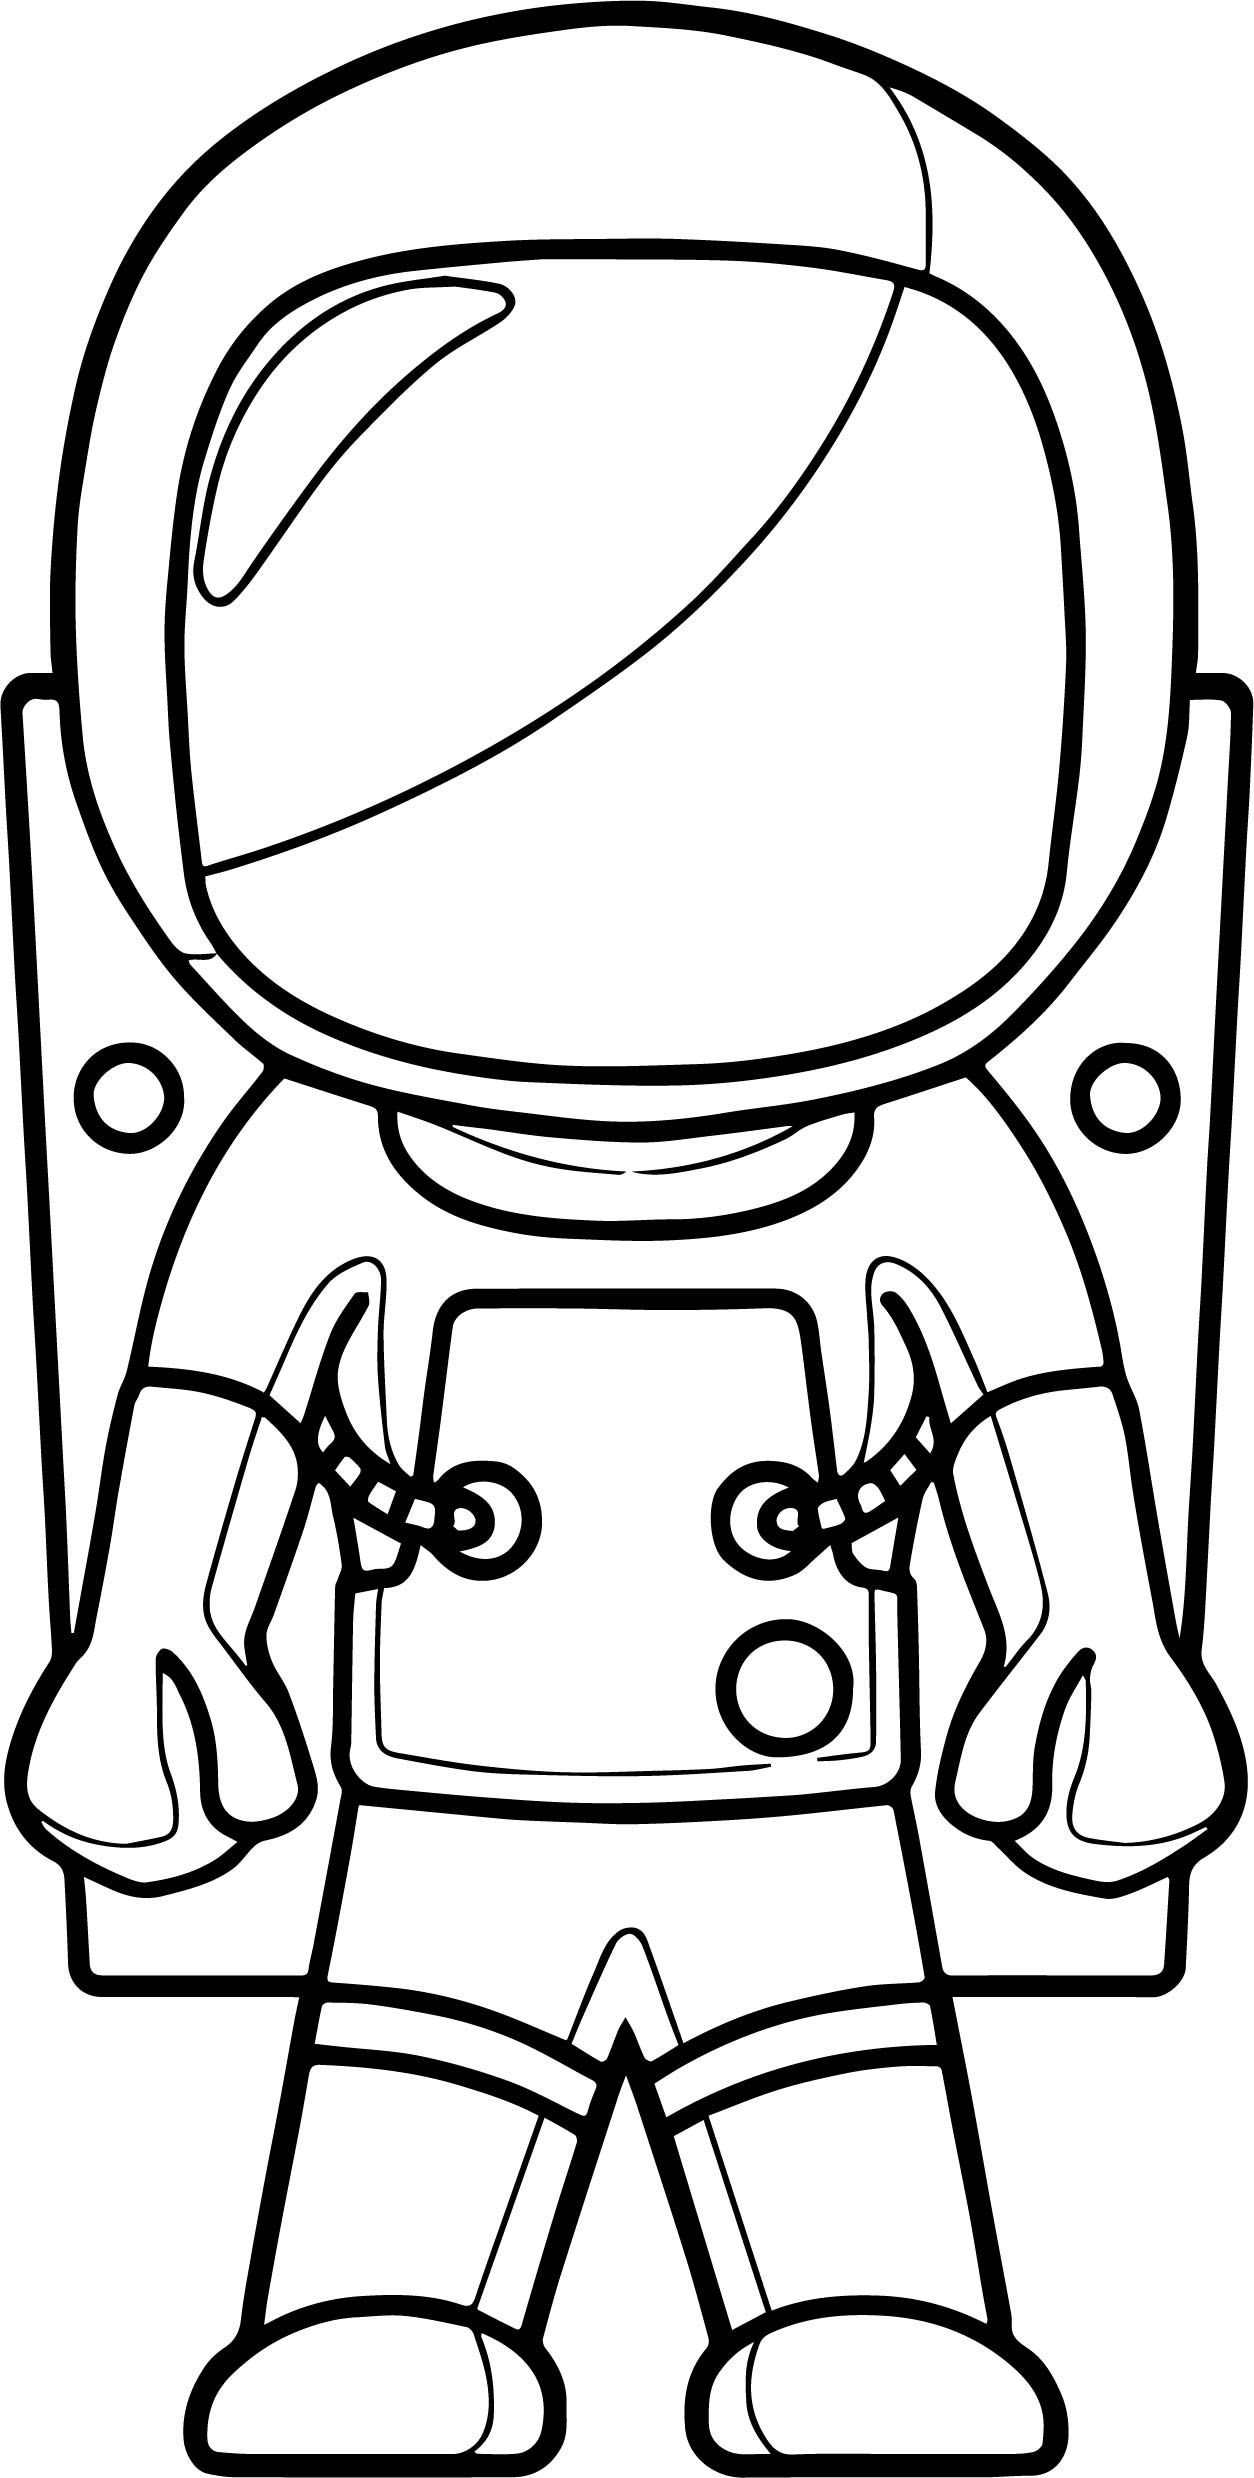 nice Closed Astronaut Coloring Page | Space coloring pages, Preschool coloring  pages, Coloring pages